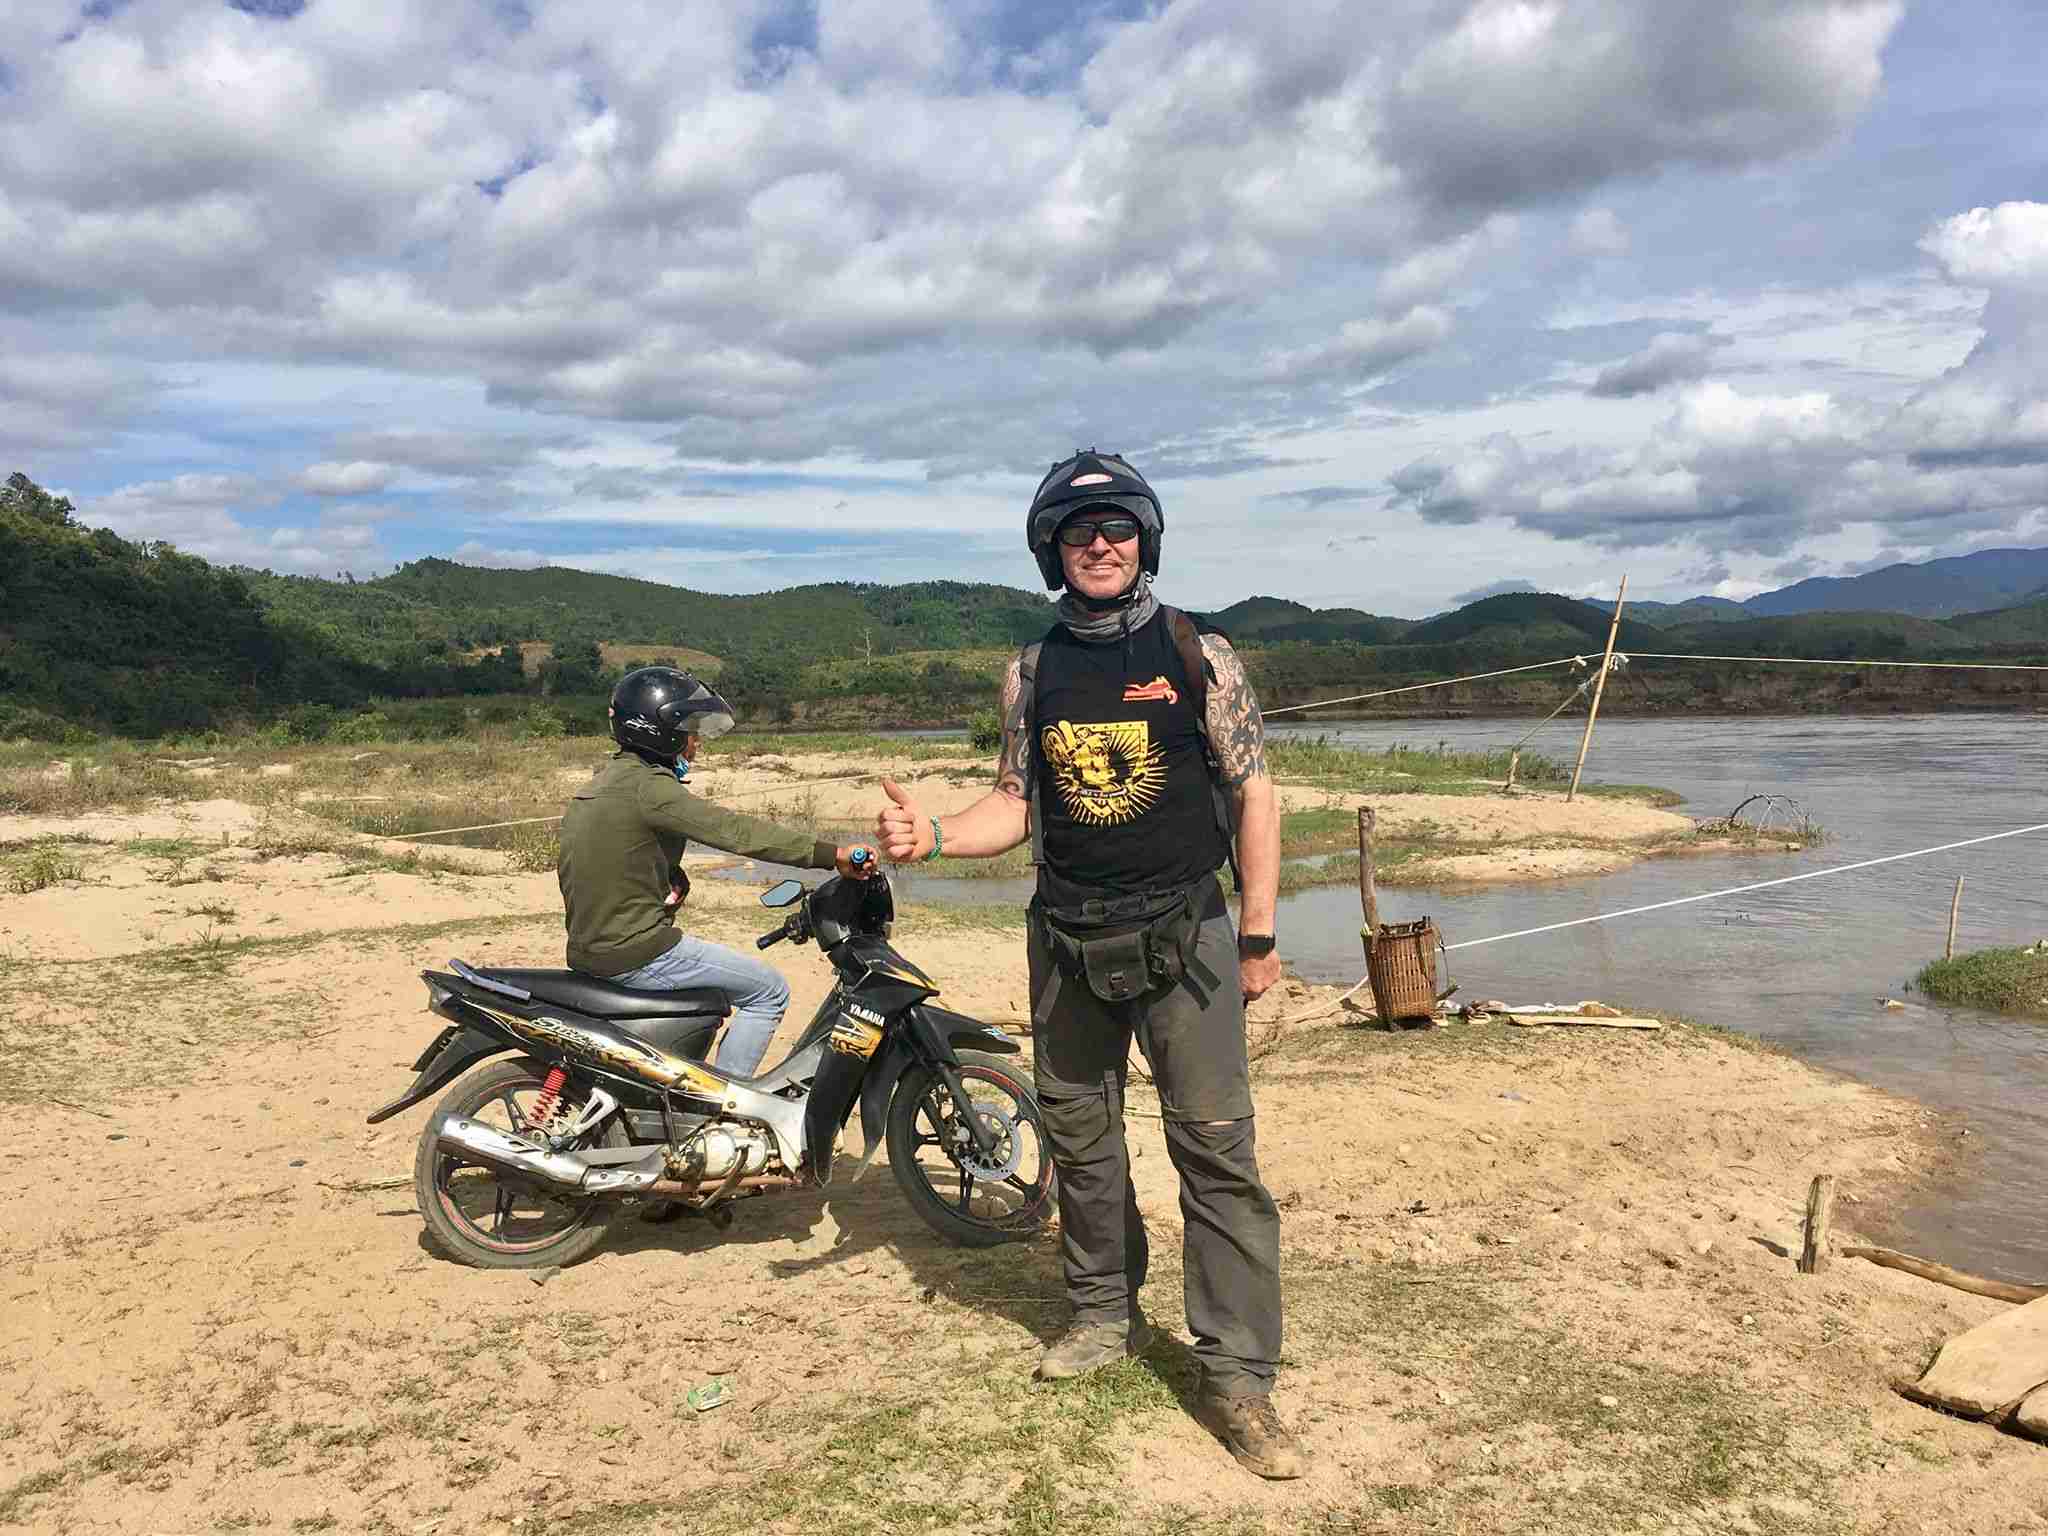 ADVENTURE DA LAT BACKROAD MOTORCYCLE TOUR TO HOI AN ON HO CHI MINH TRAIL - 6 DAYS